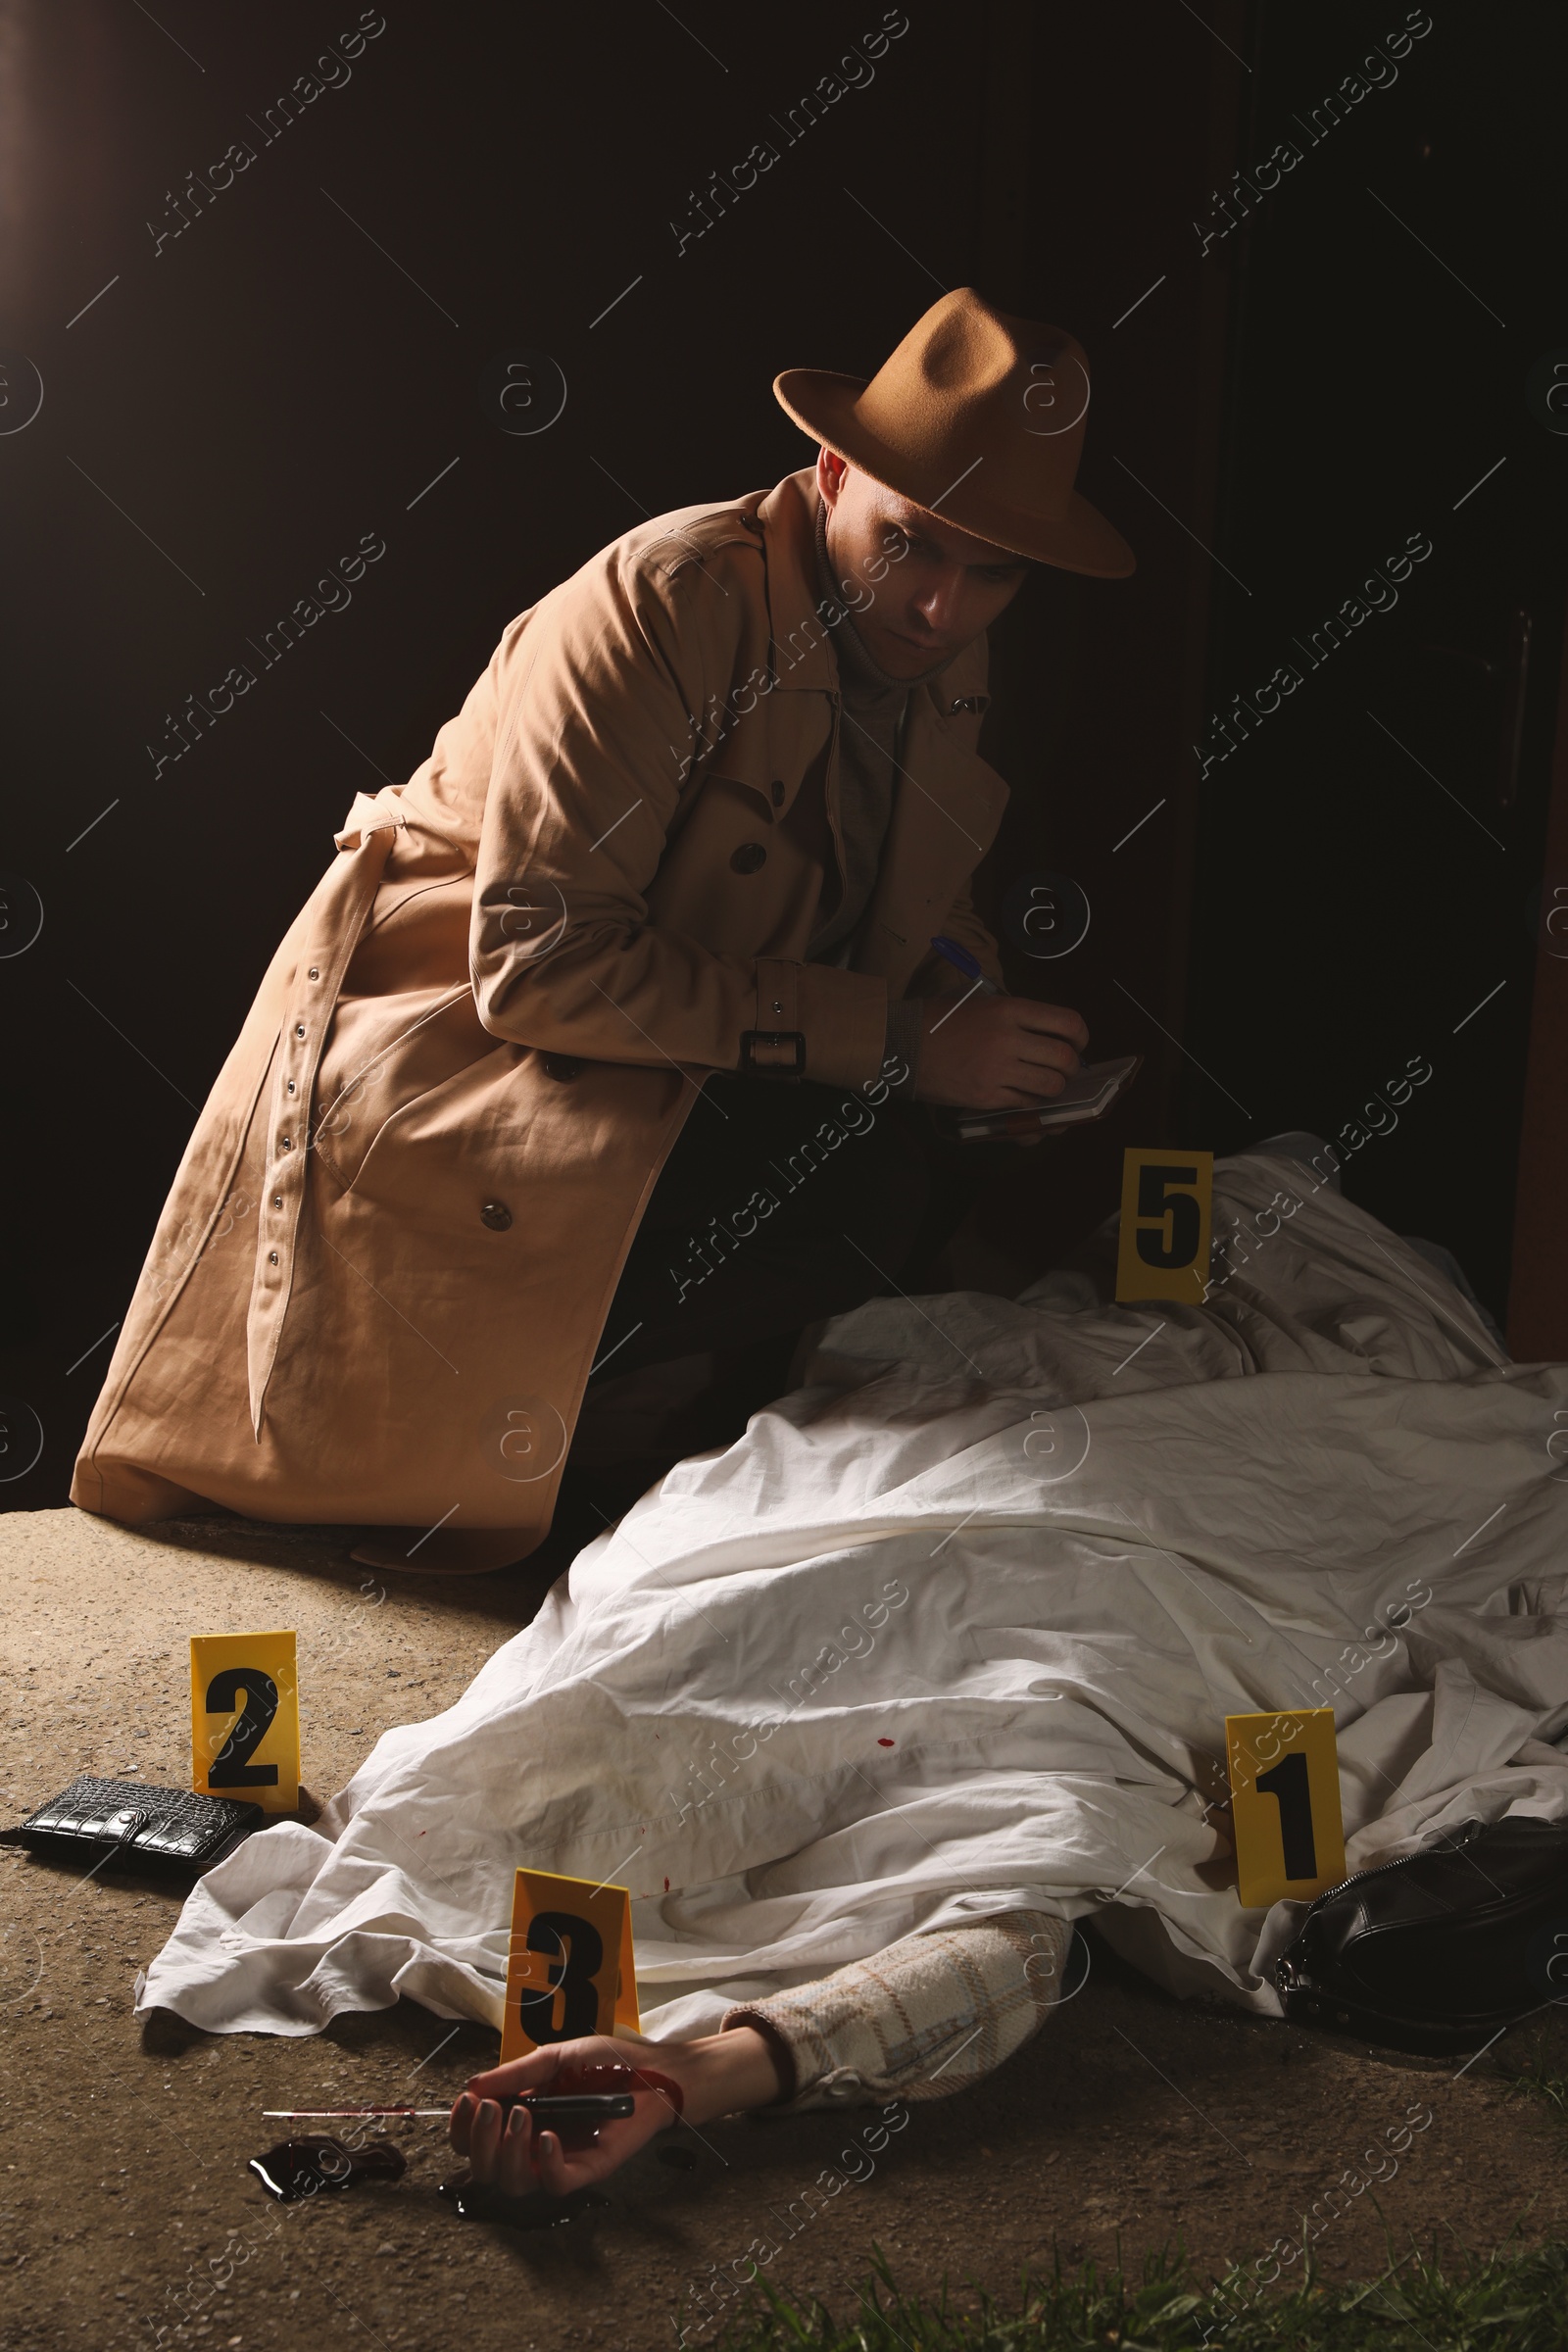 Photo of Investigator examining crime scene with dead body outdoors